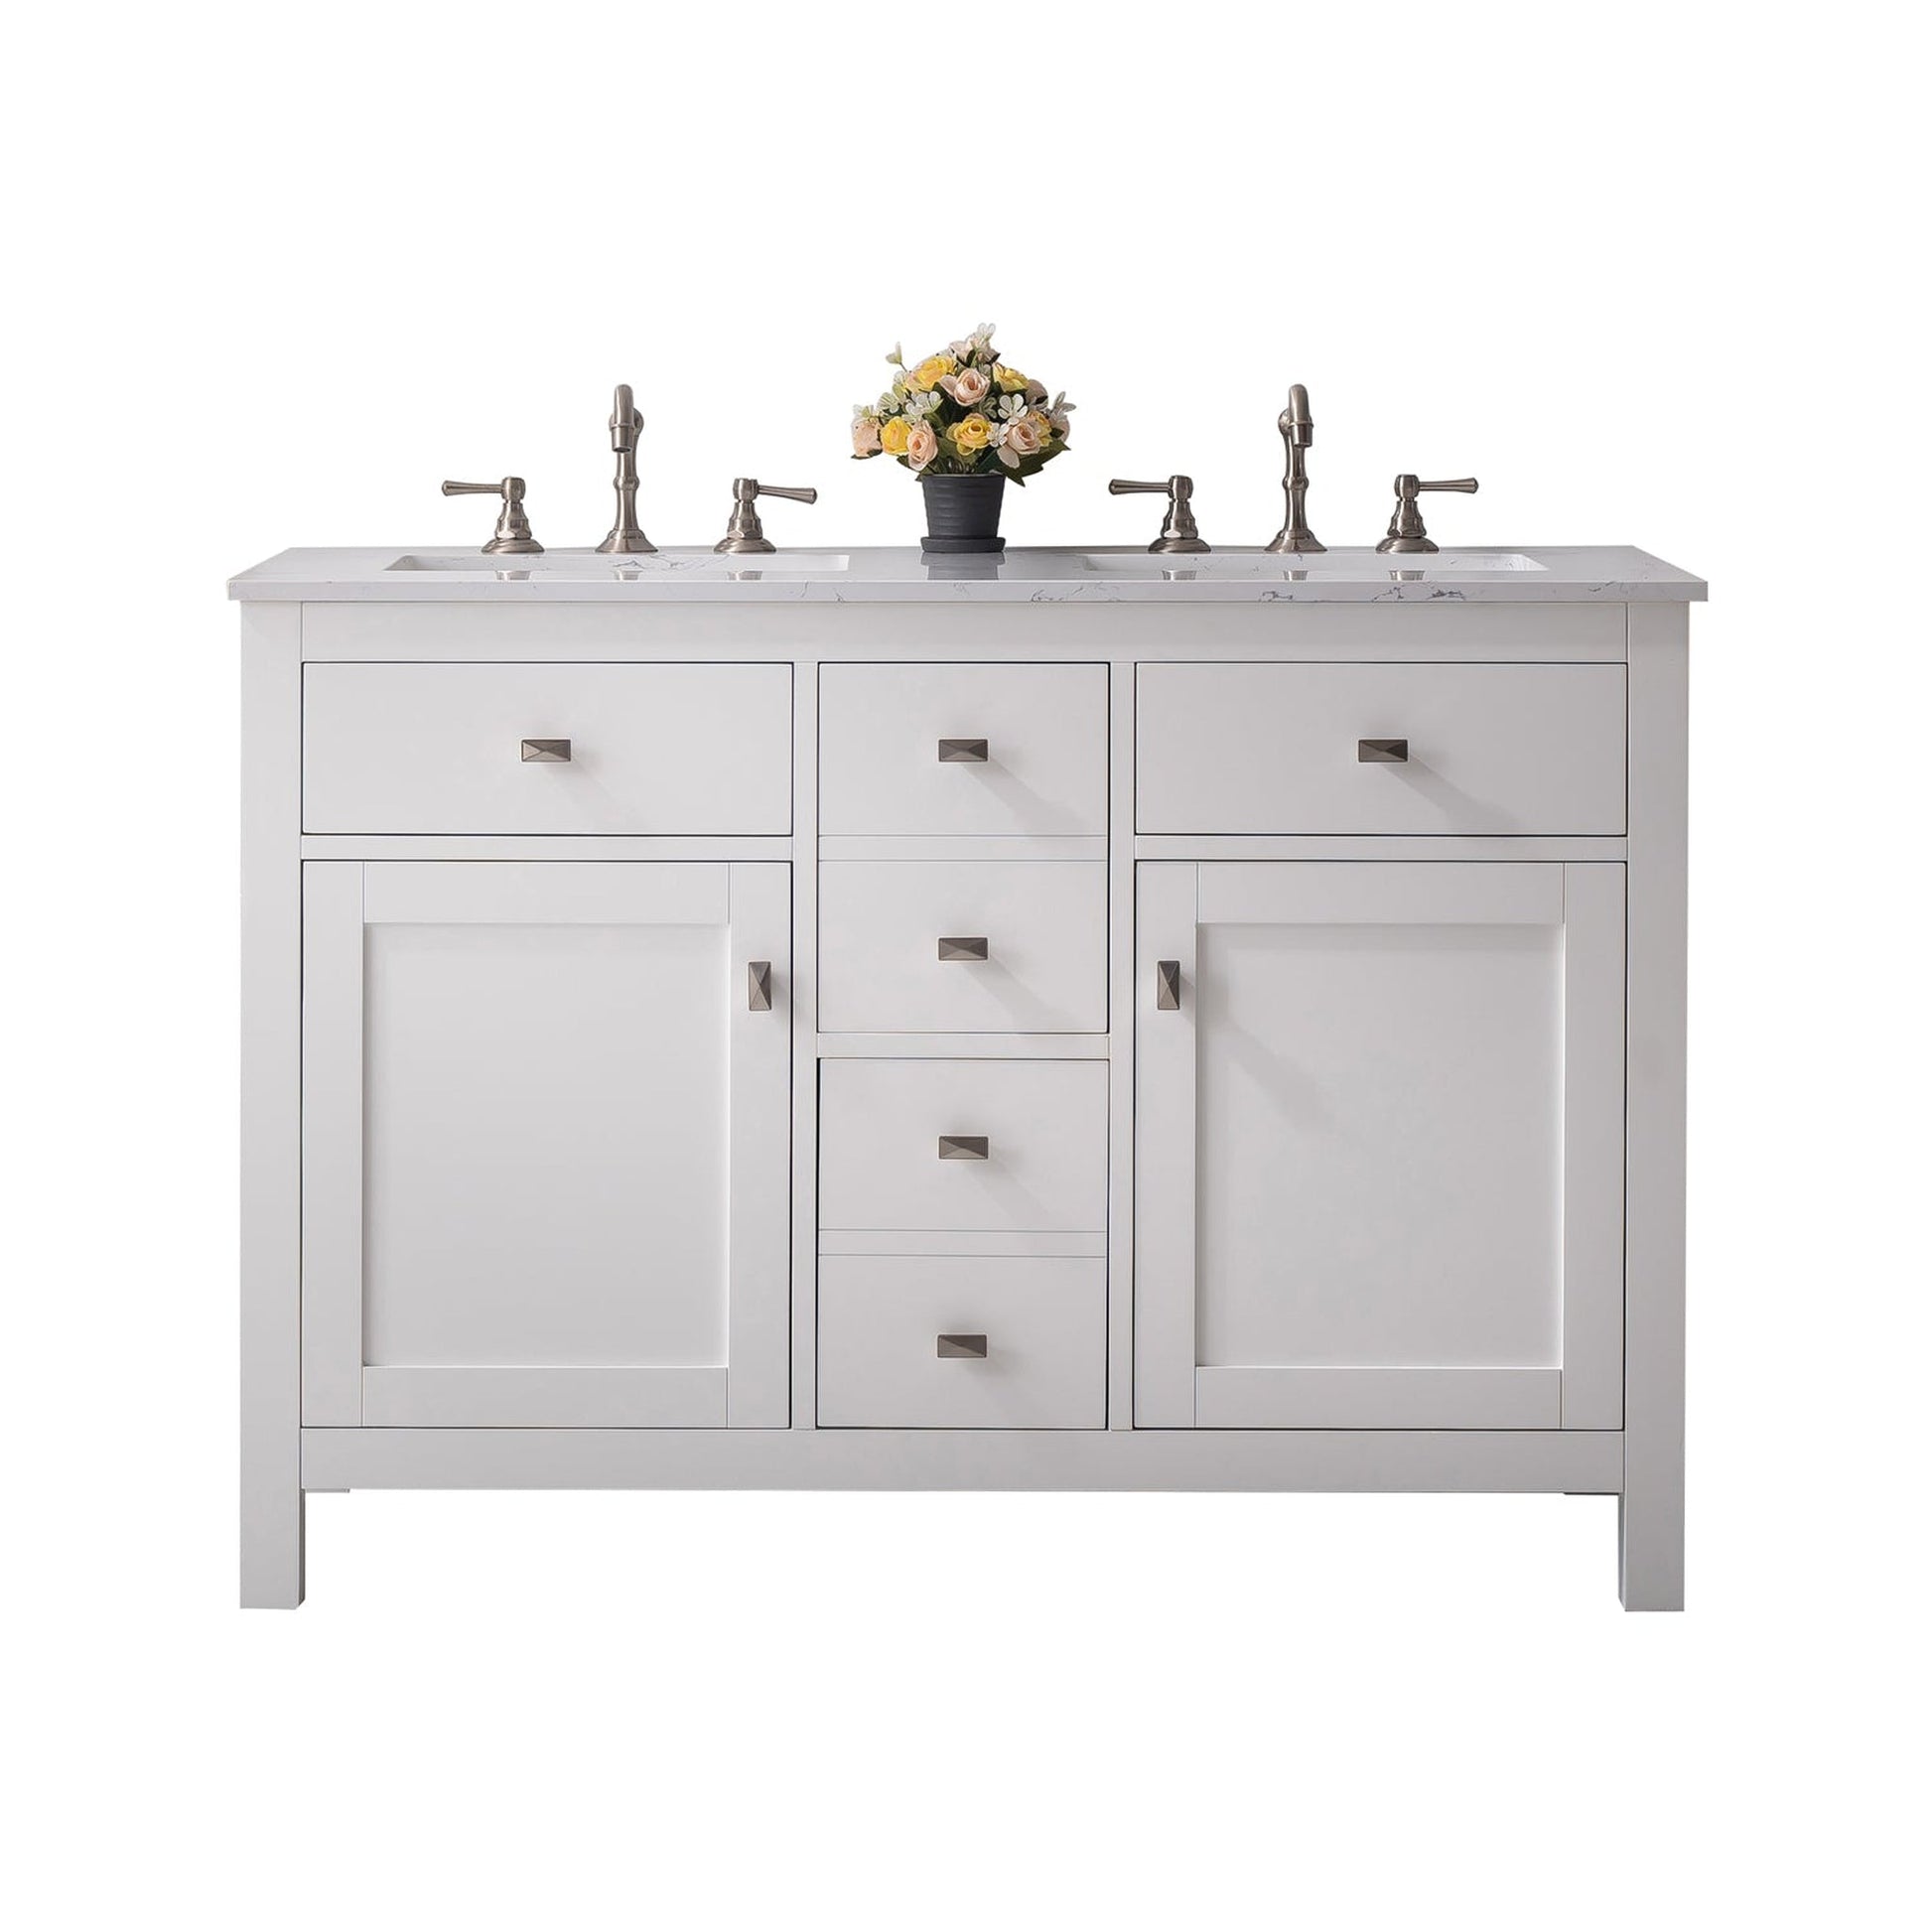 Eviva Totti Artemis 48" x 34" White Freestanding Bathroom Vanity With Carrara Style Man-made Stone Countertop and Double Undermount Sink